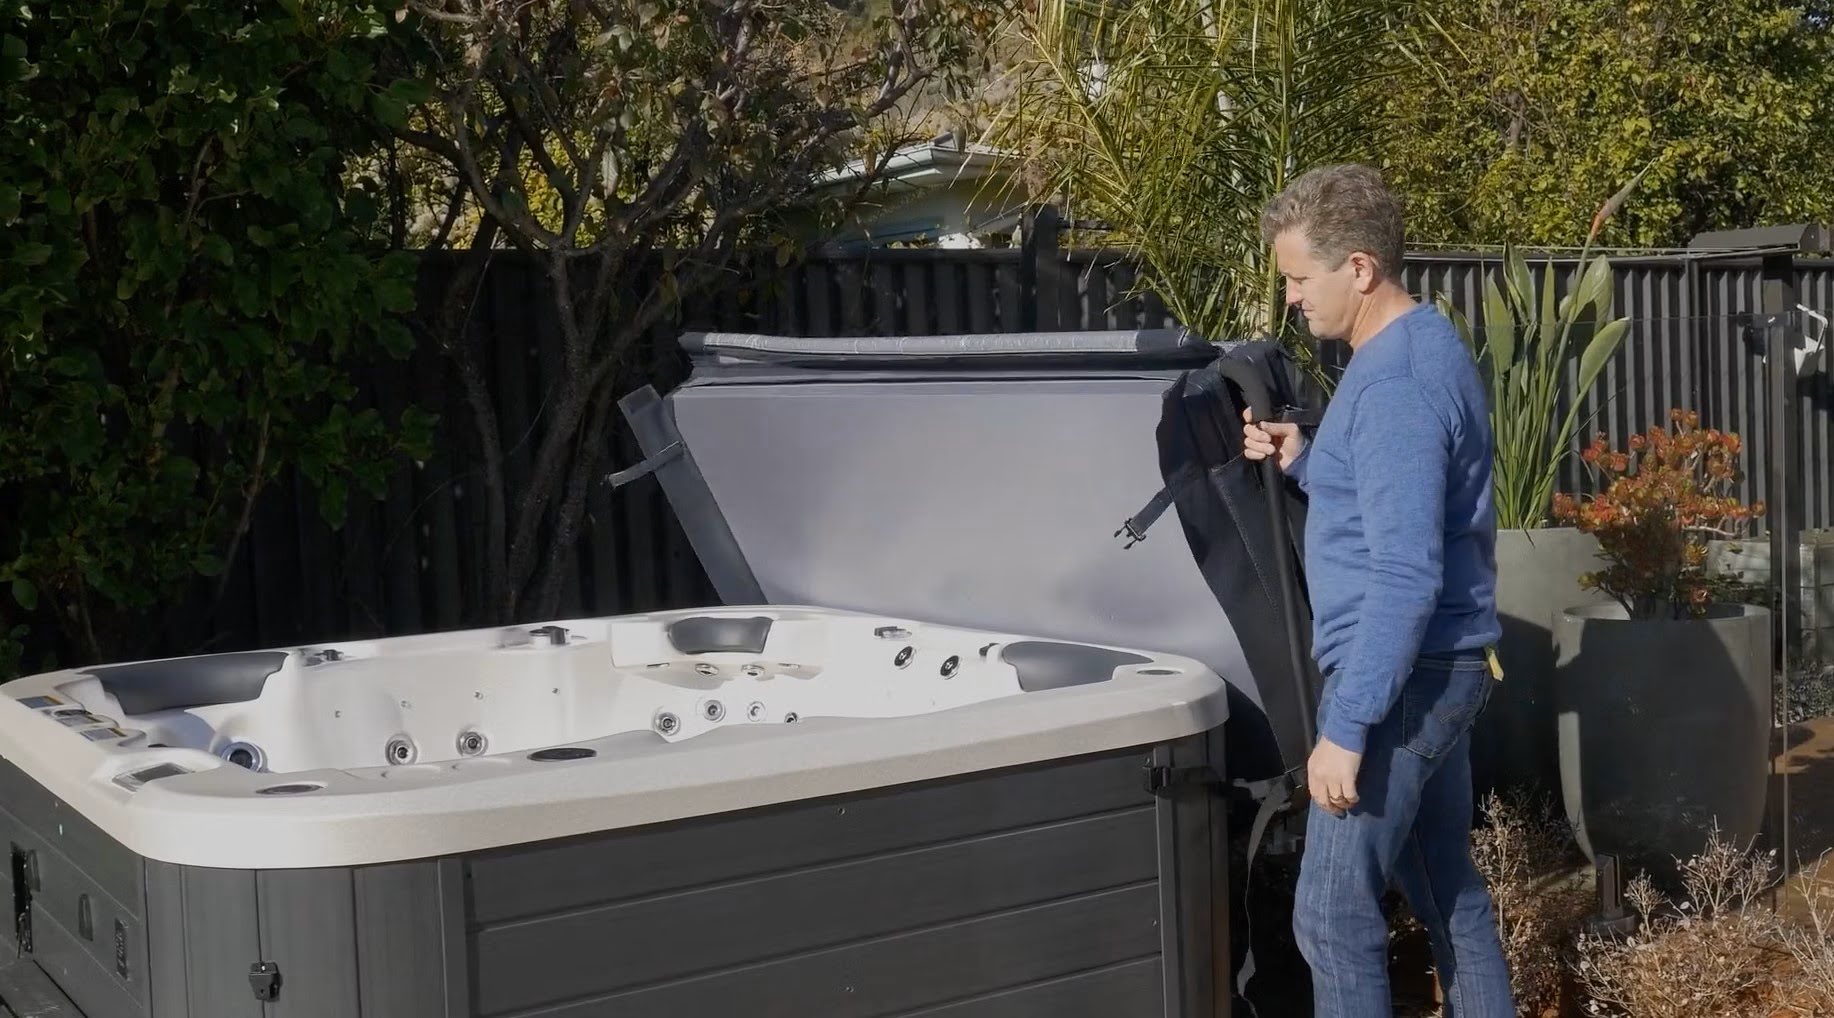 How To Install A Hot Tub Cover Lift